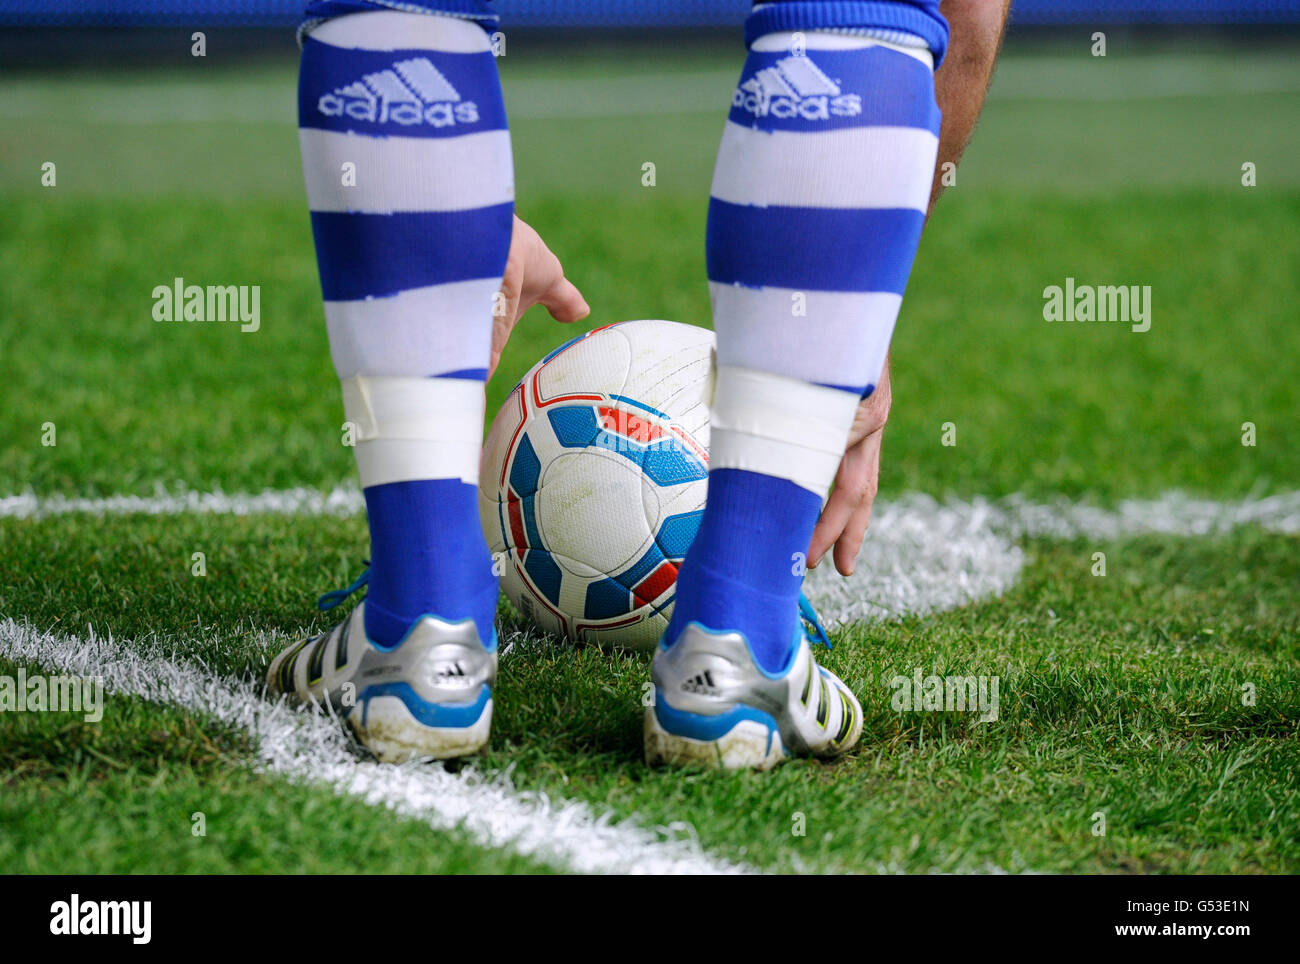 Player of FC Schalke 04 placing the ball inside the corner flag markings during the match between FC Schalke 04 and Borussia Stock Photo